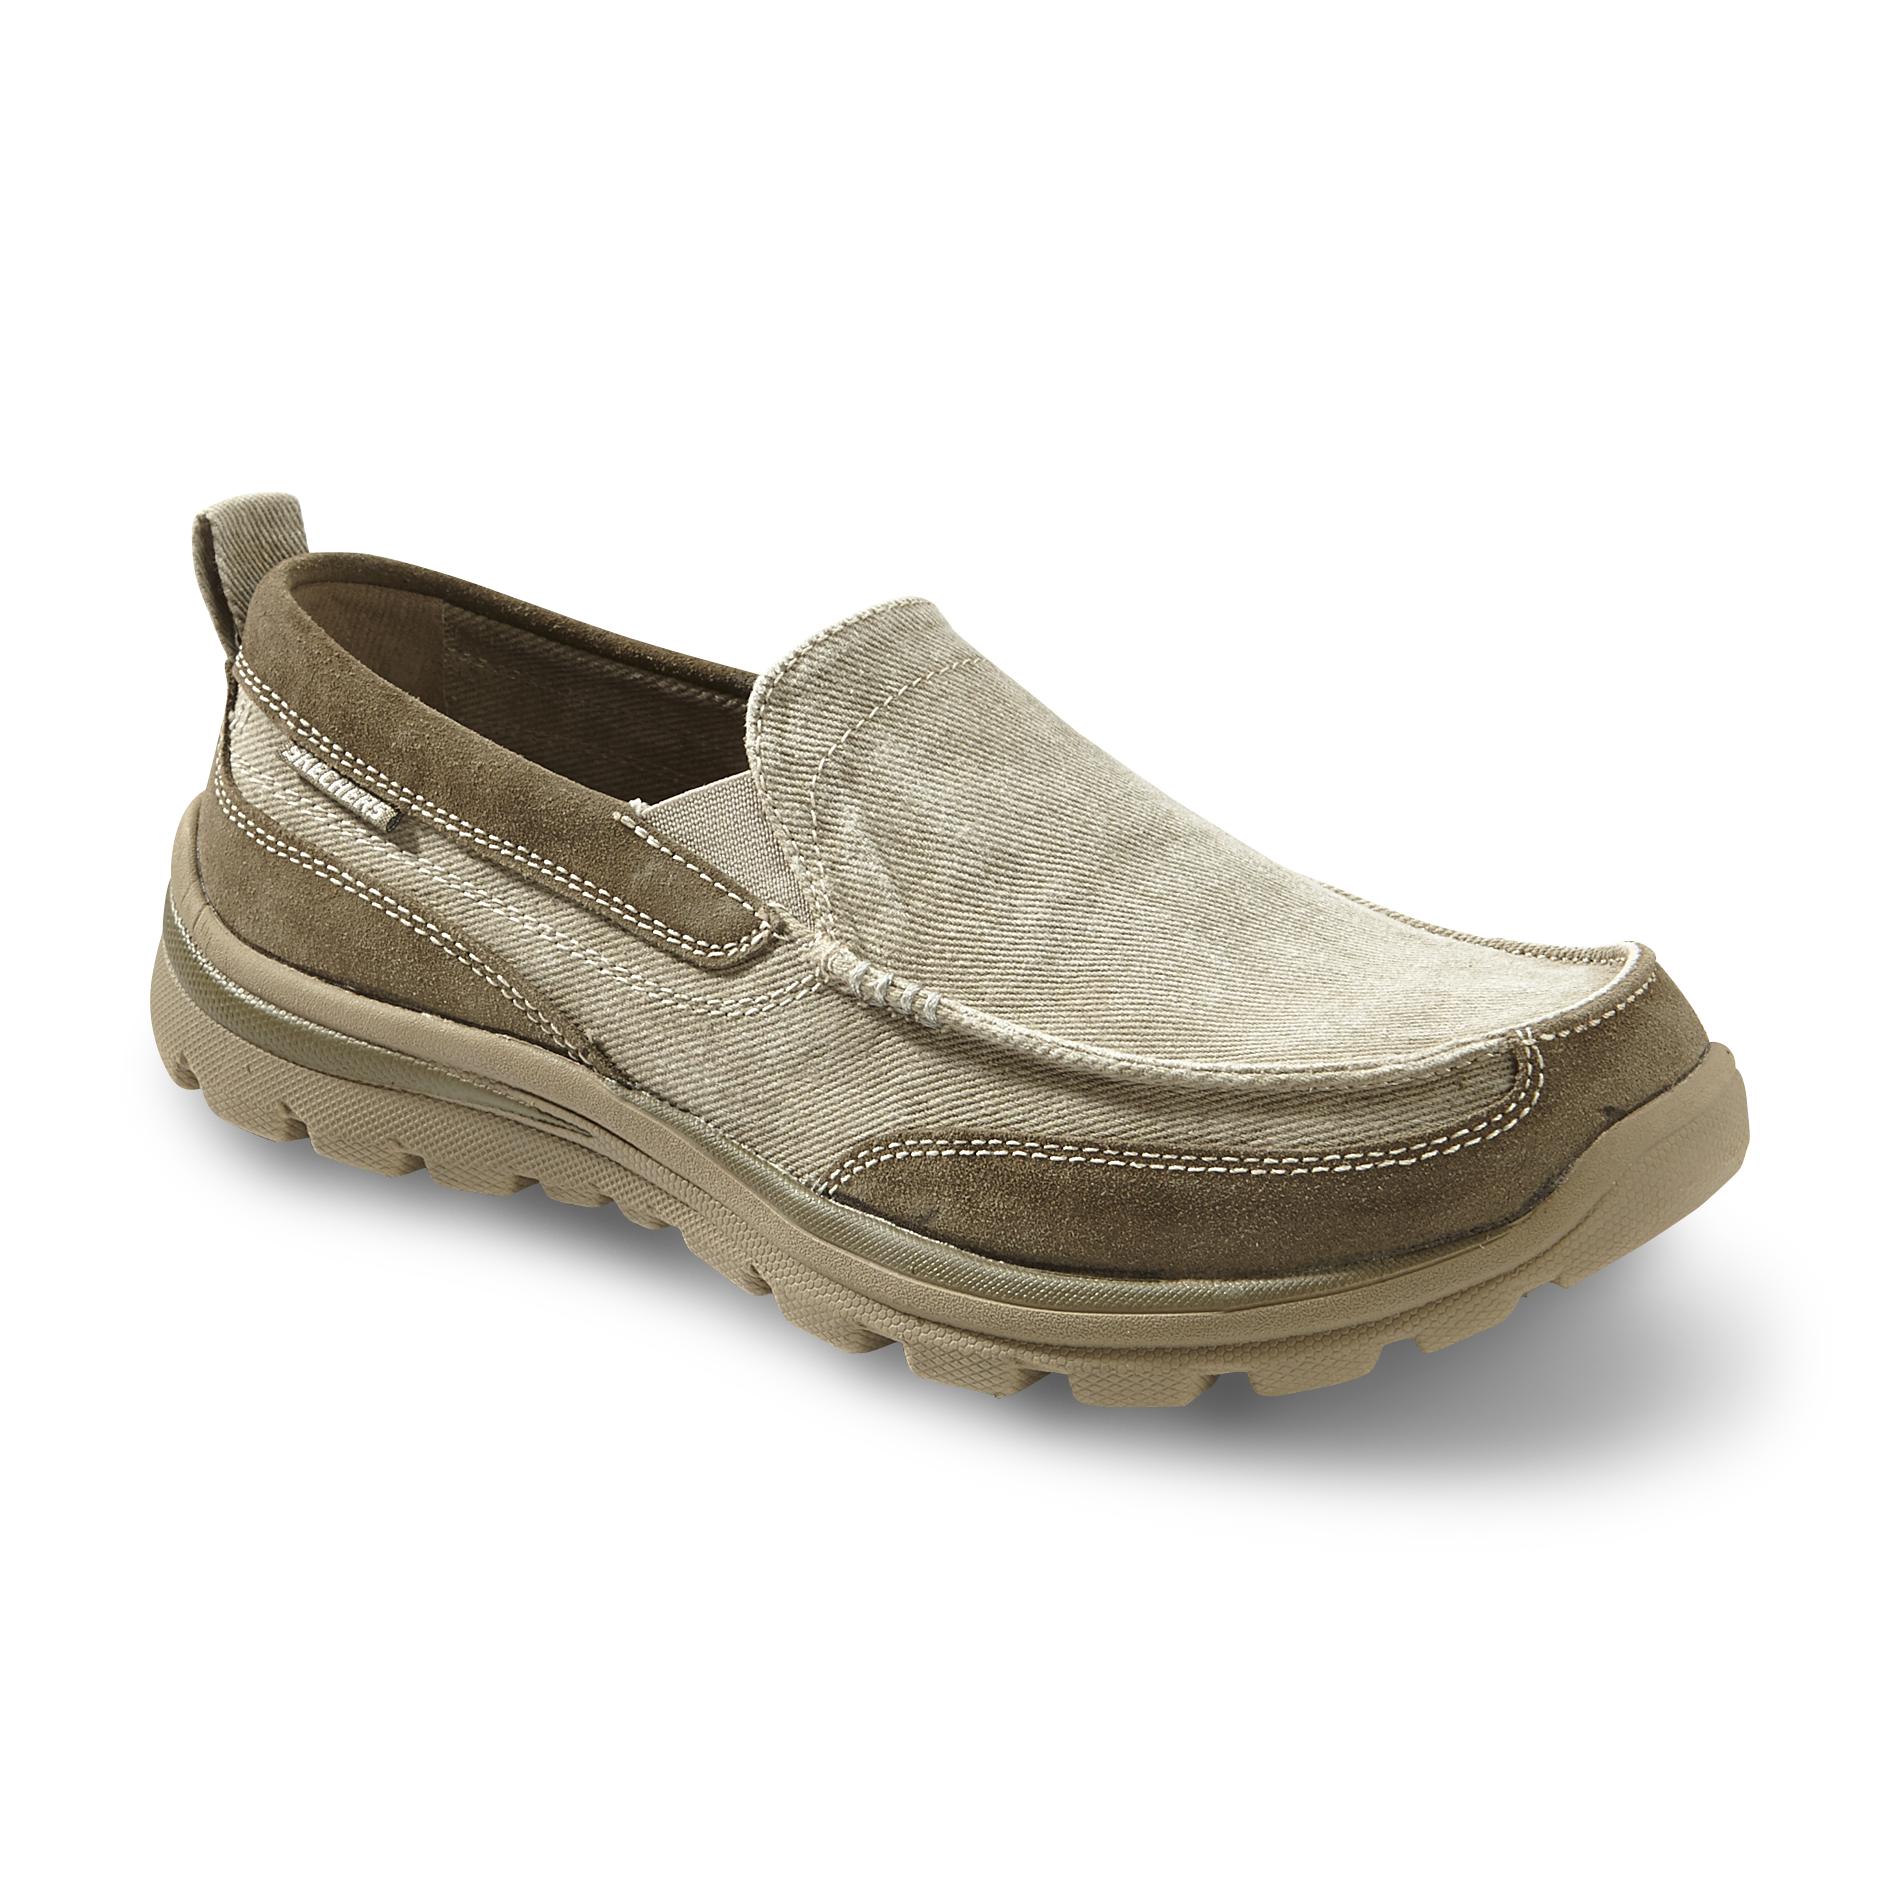 Skechers Men's Relaxed Fit Melvin Casual Slip On - Taupe